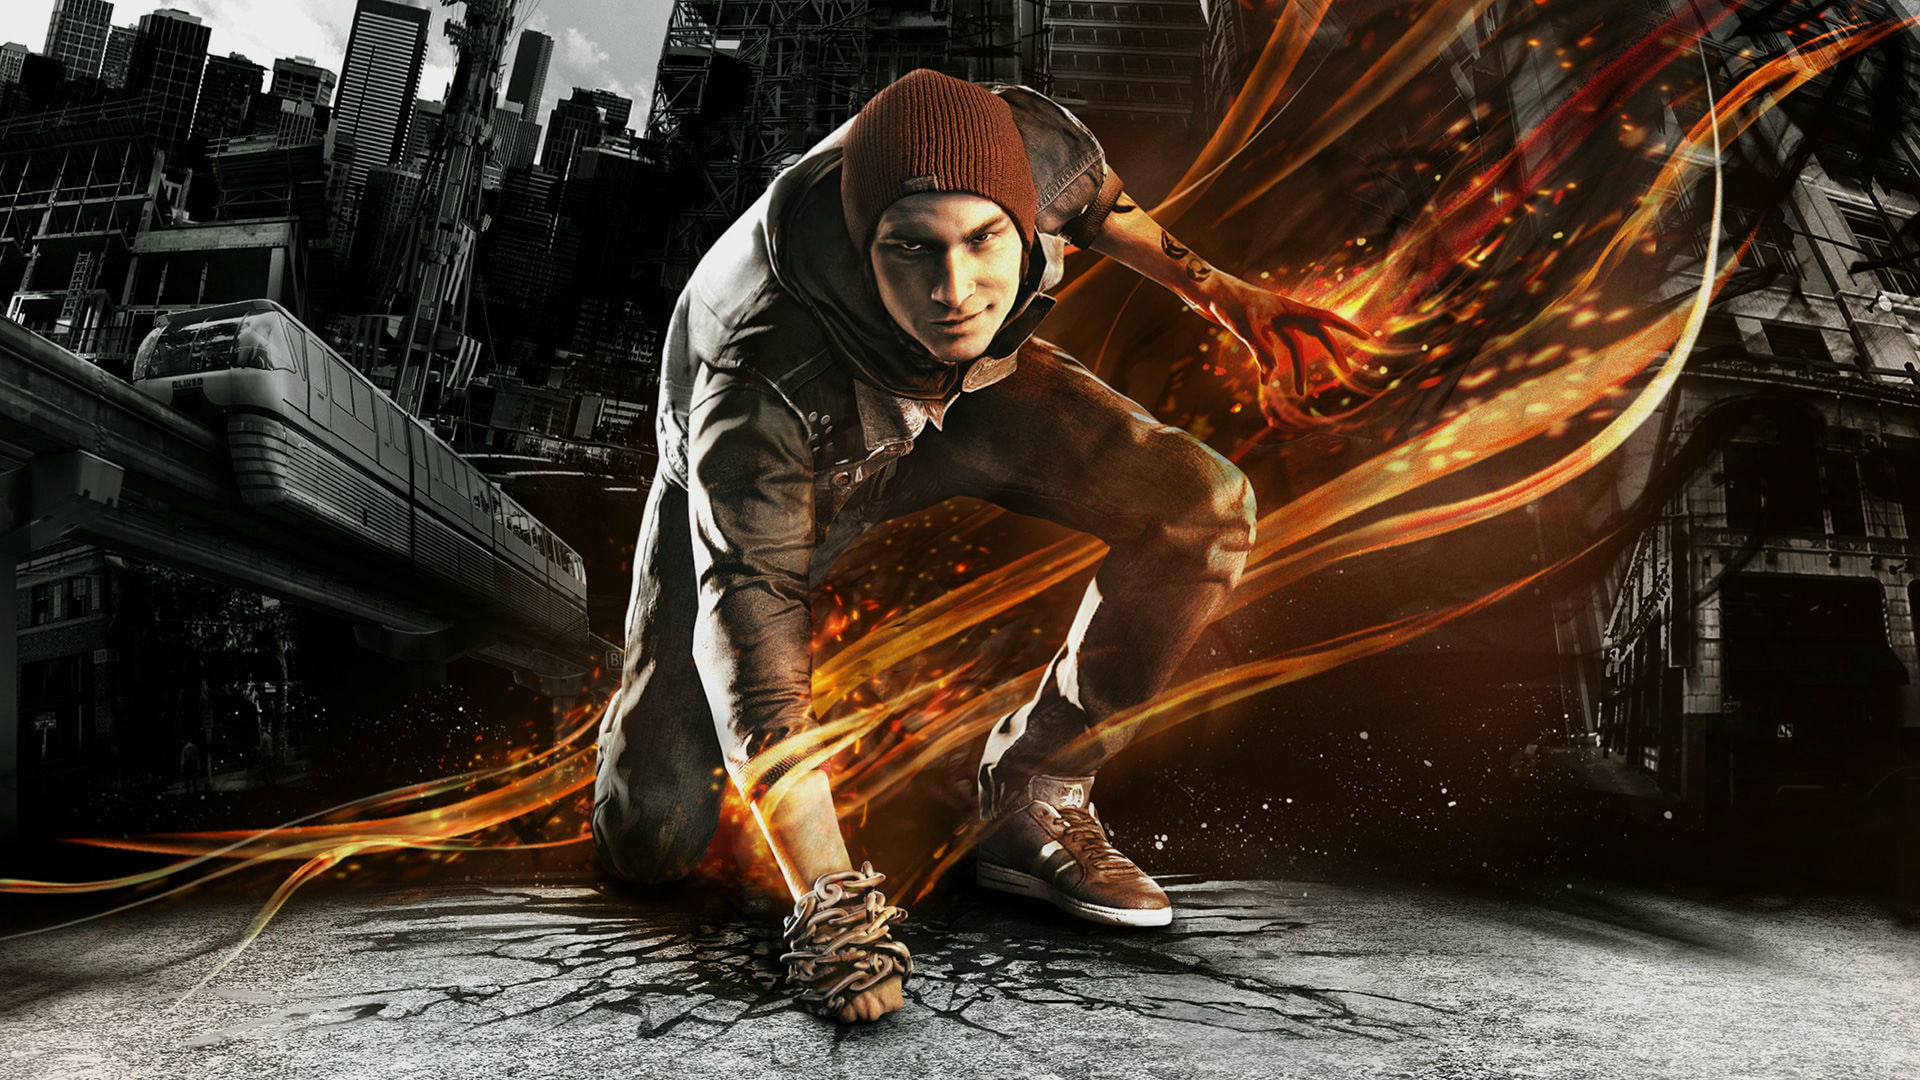 Video Game, inFAMOUS: Second Son